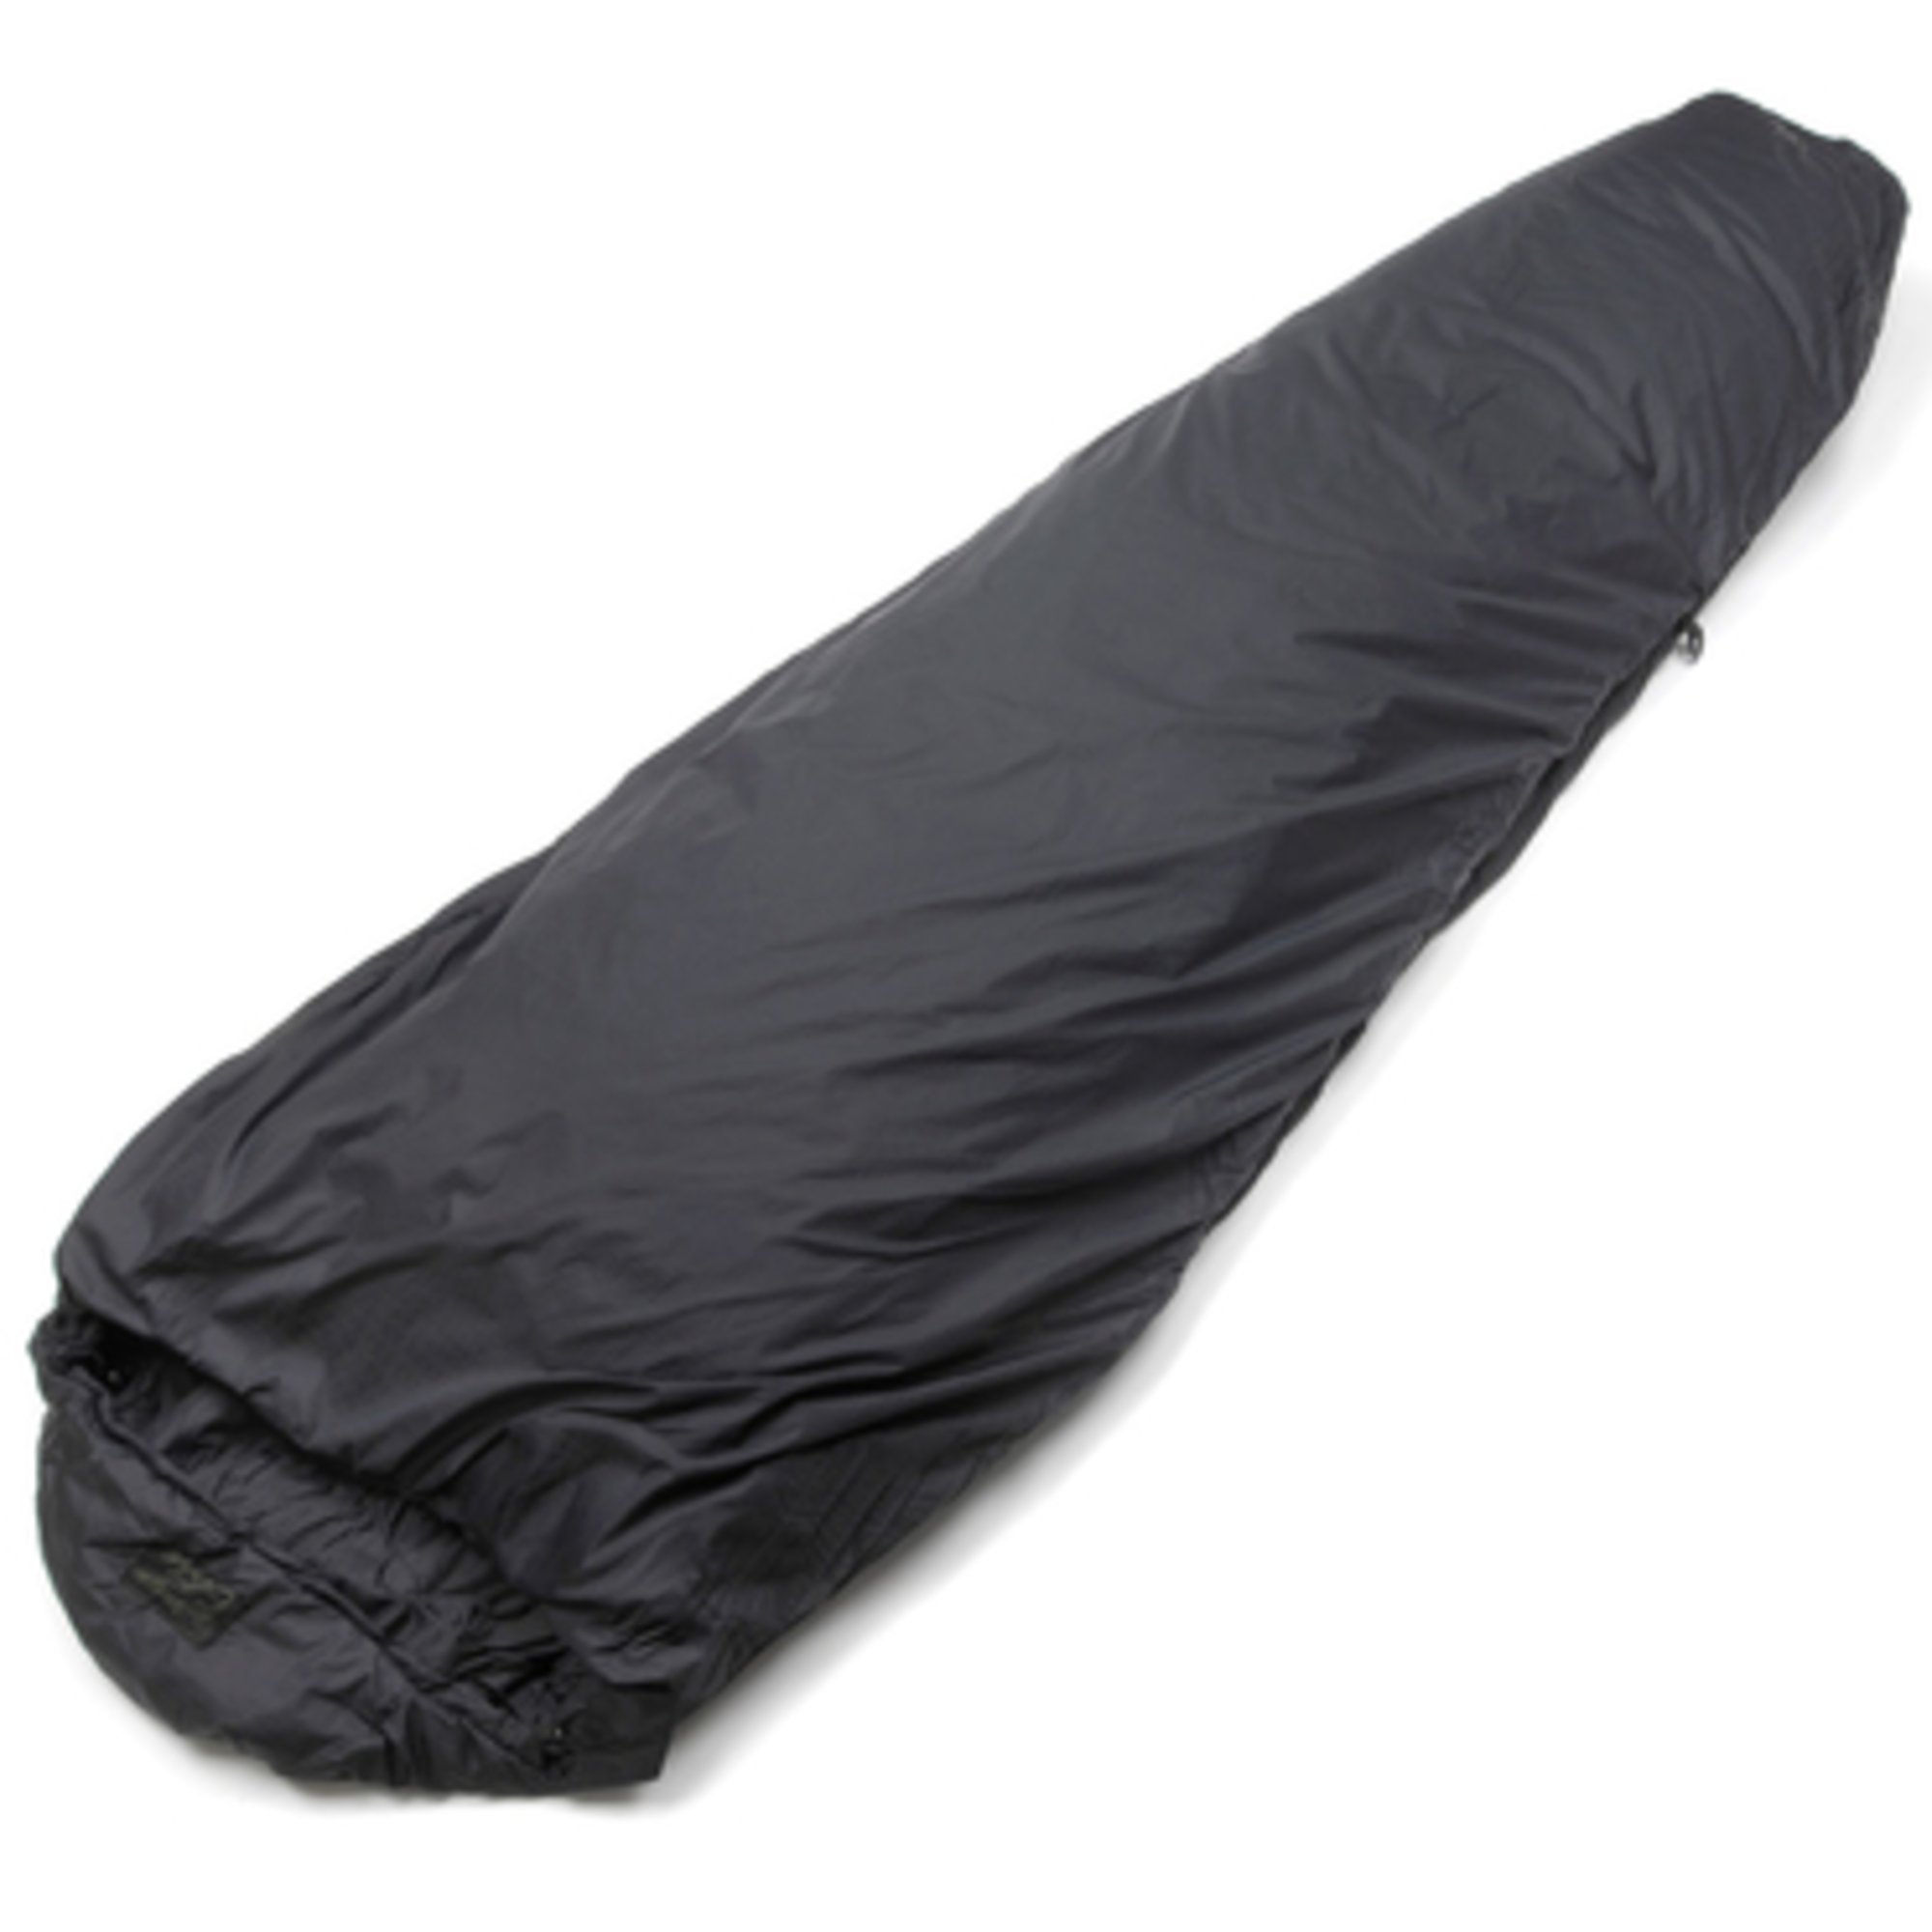 Sports & Fitness Sleeping Bags - She Males Free Videos